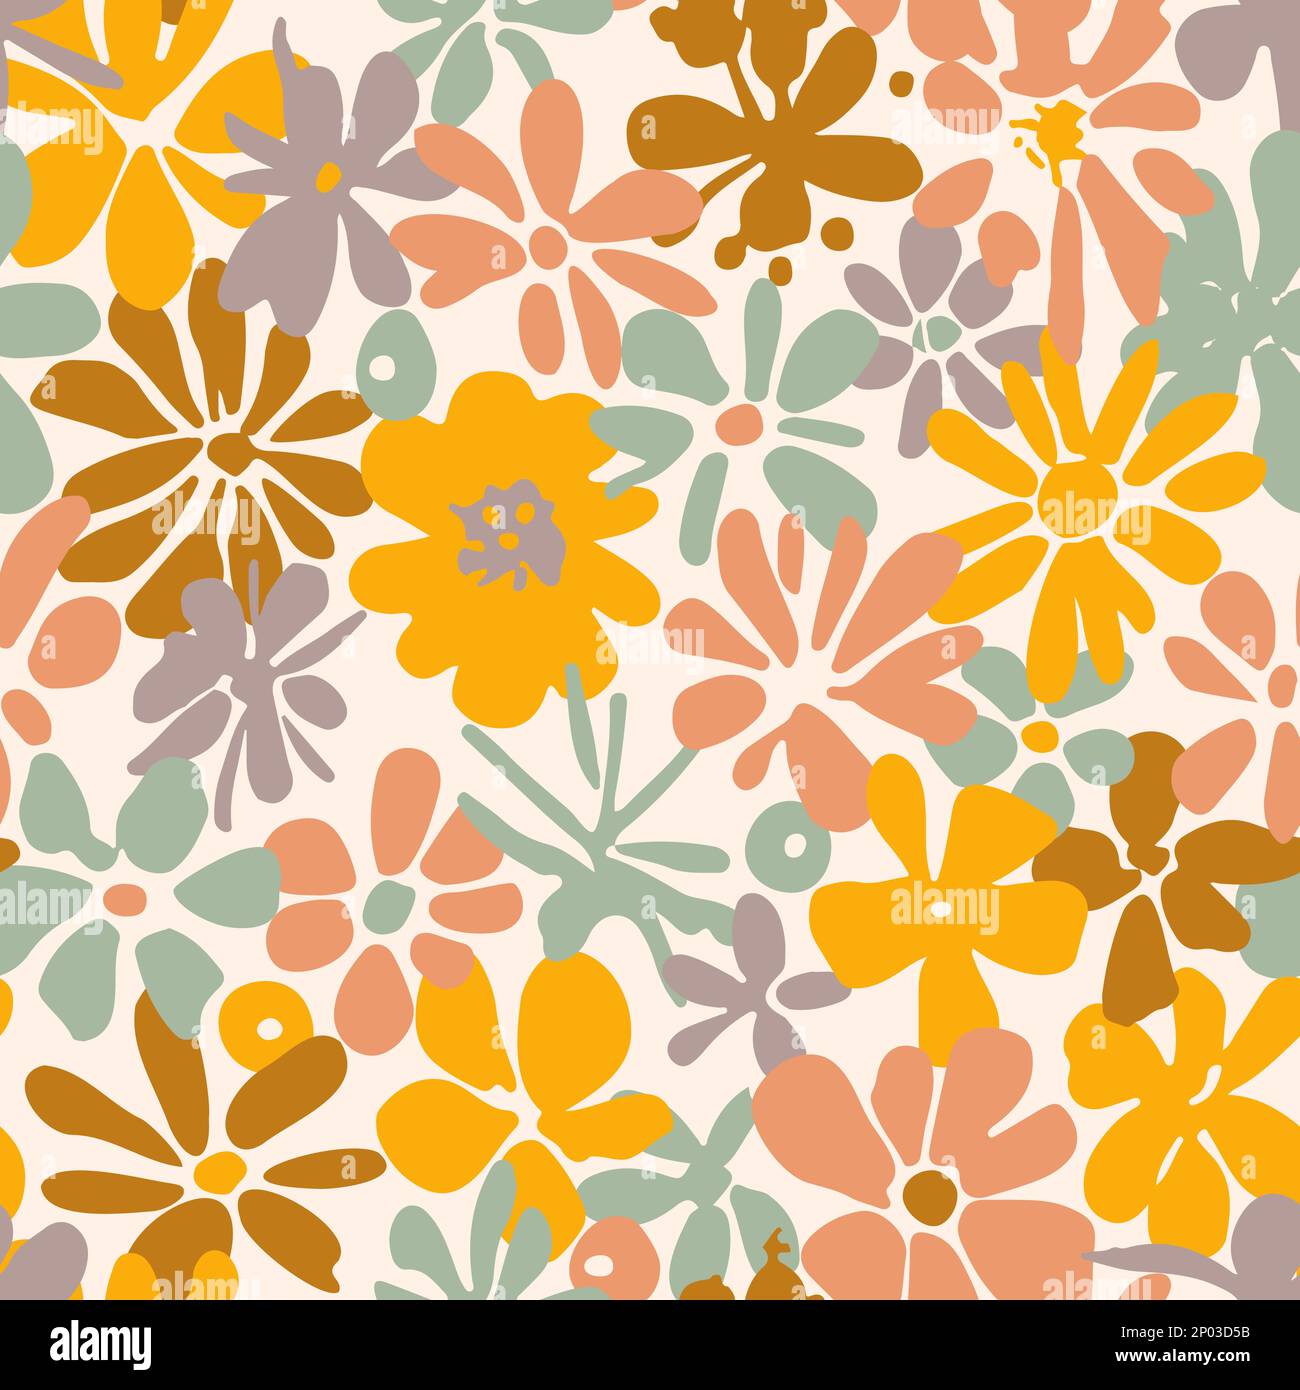 Vector Retro Vintage Festive Abstract Spring or Summer Floral Seamless Surface Pattern for Products, Fabric or Wrapping Paper Prints. Stock Vector